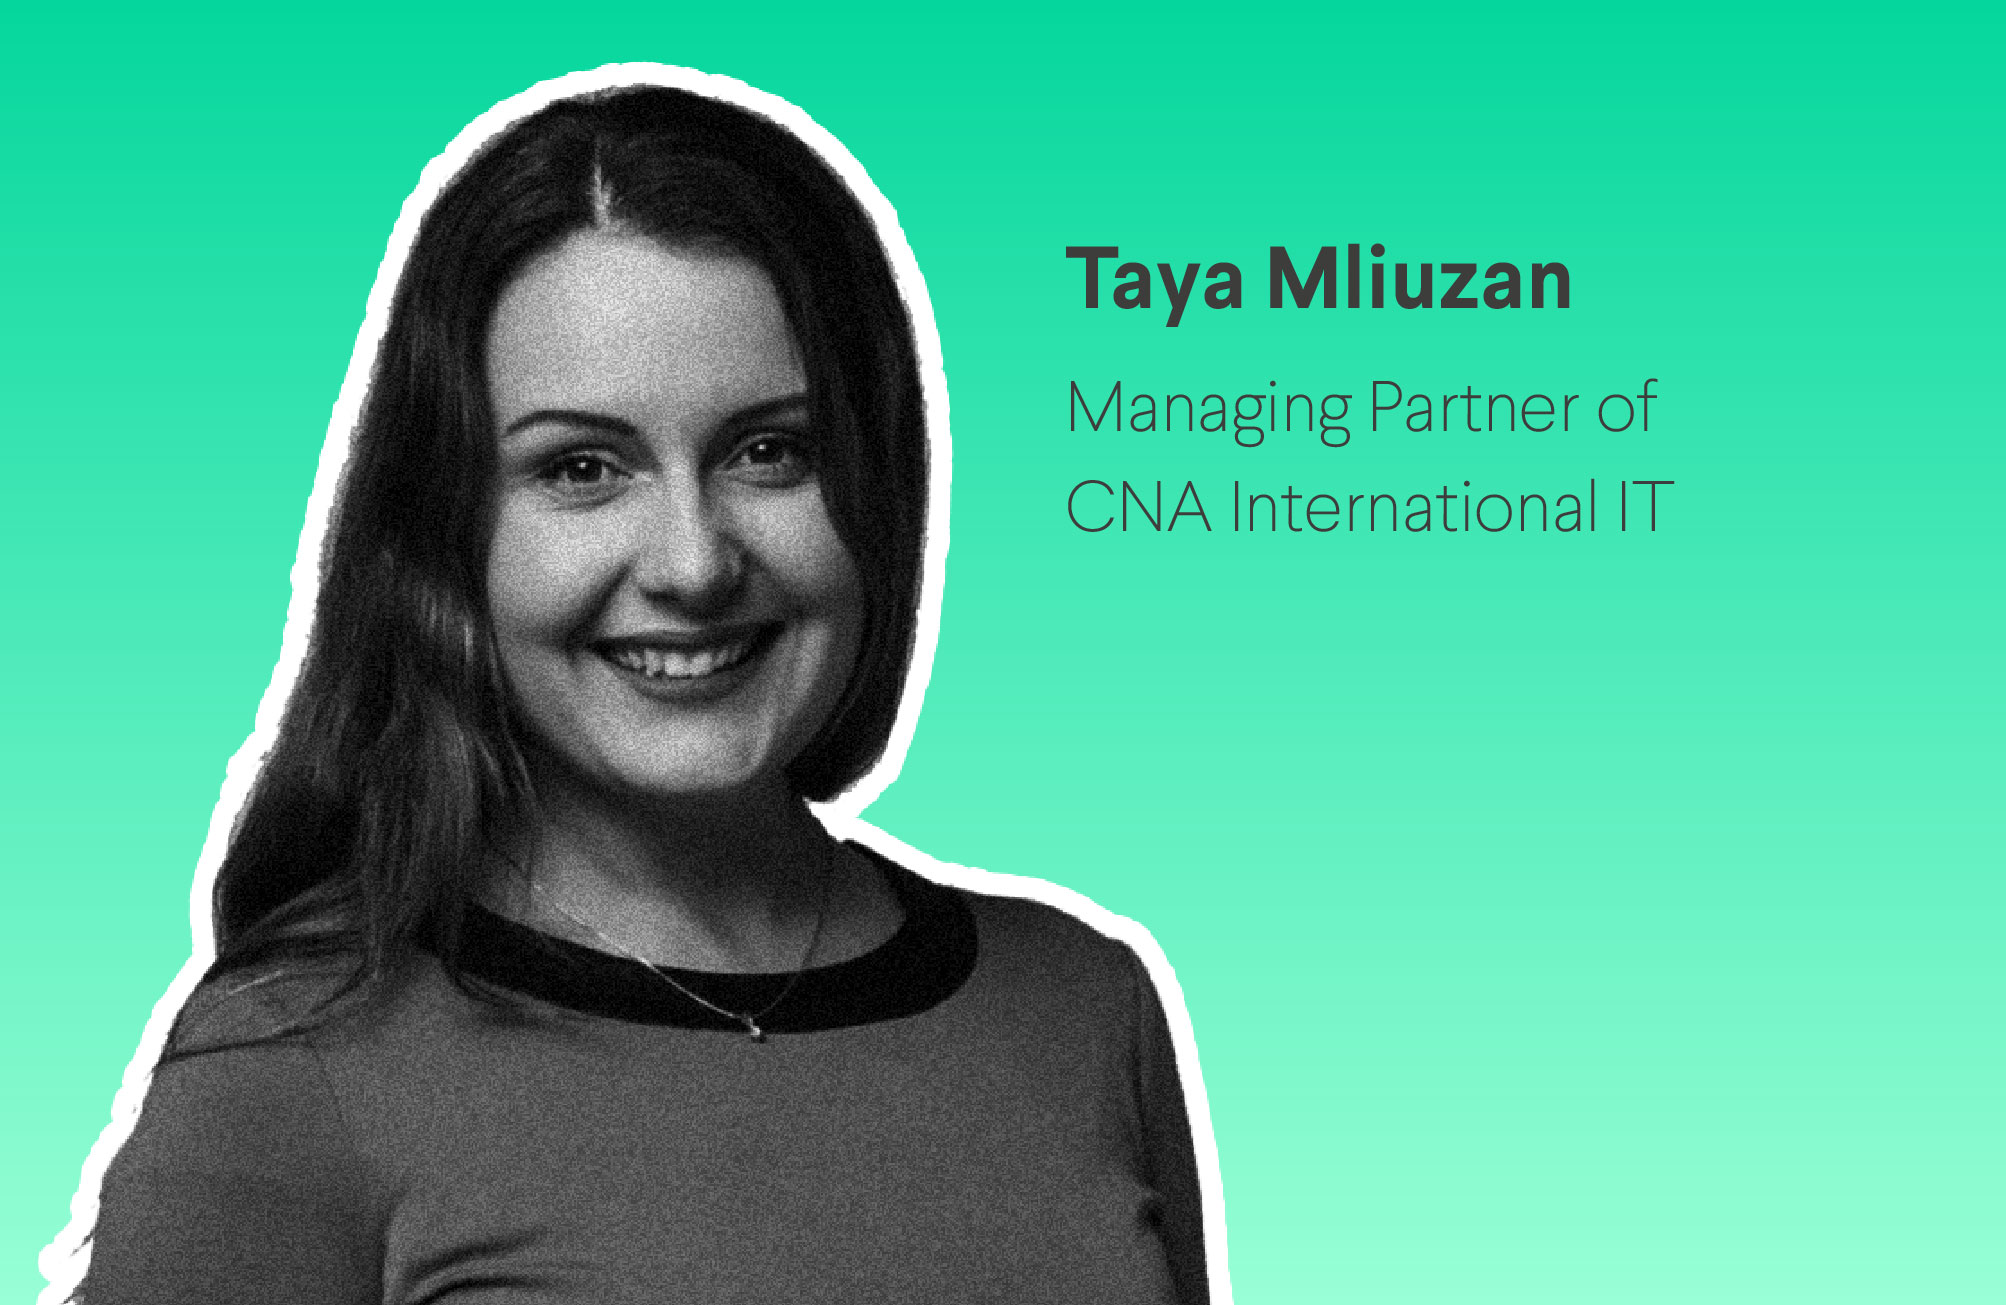 Taya Mliuzan: “When it comes to hiring high-profile specialists, soft skills reign supreme.”